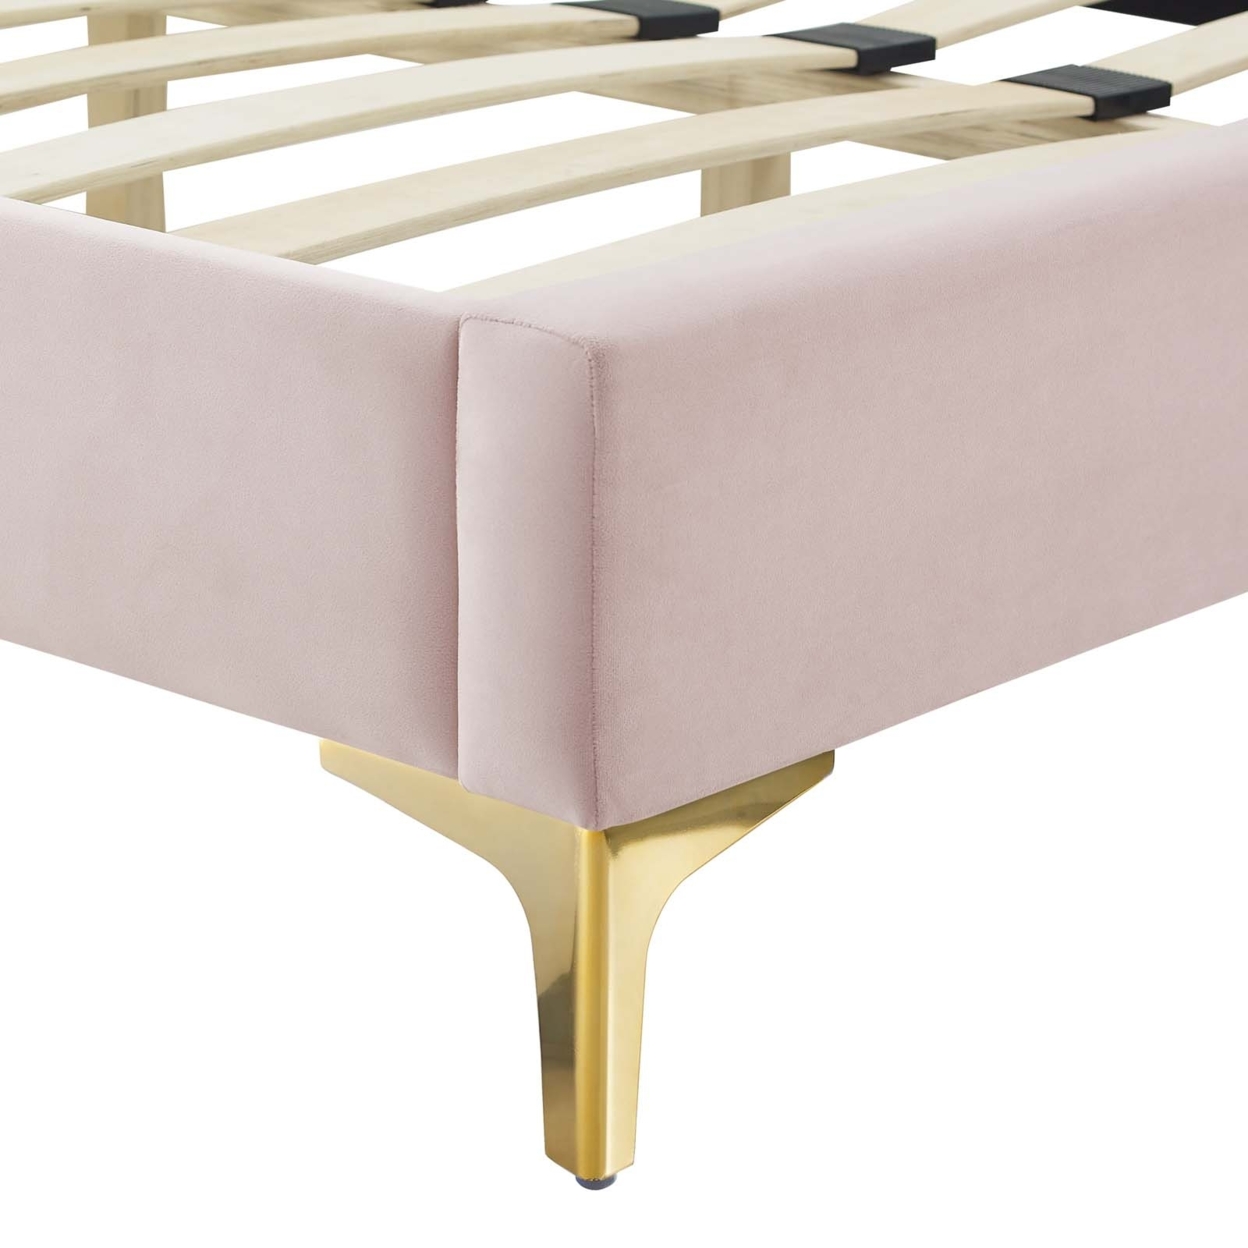 King Bed, Soft Pink Velvet, Diamond Stiched Panel Headboard